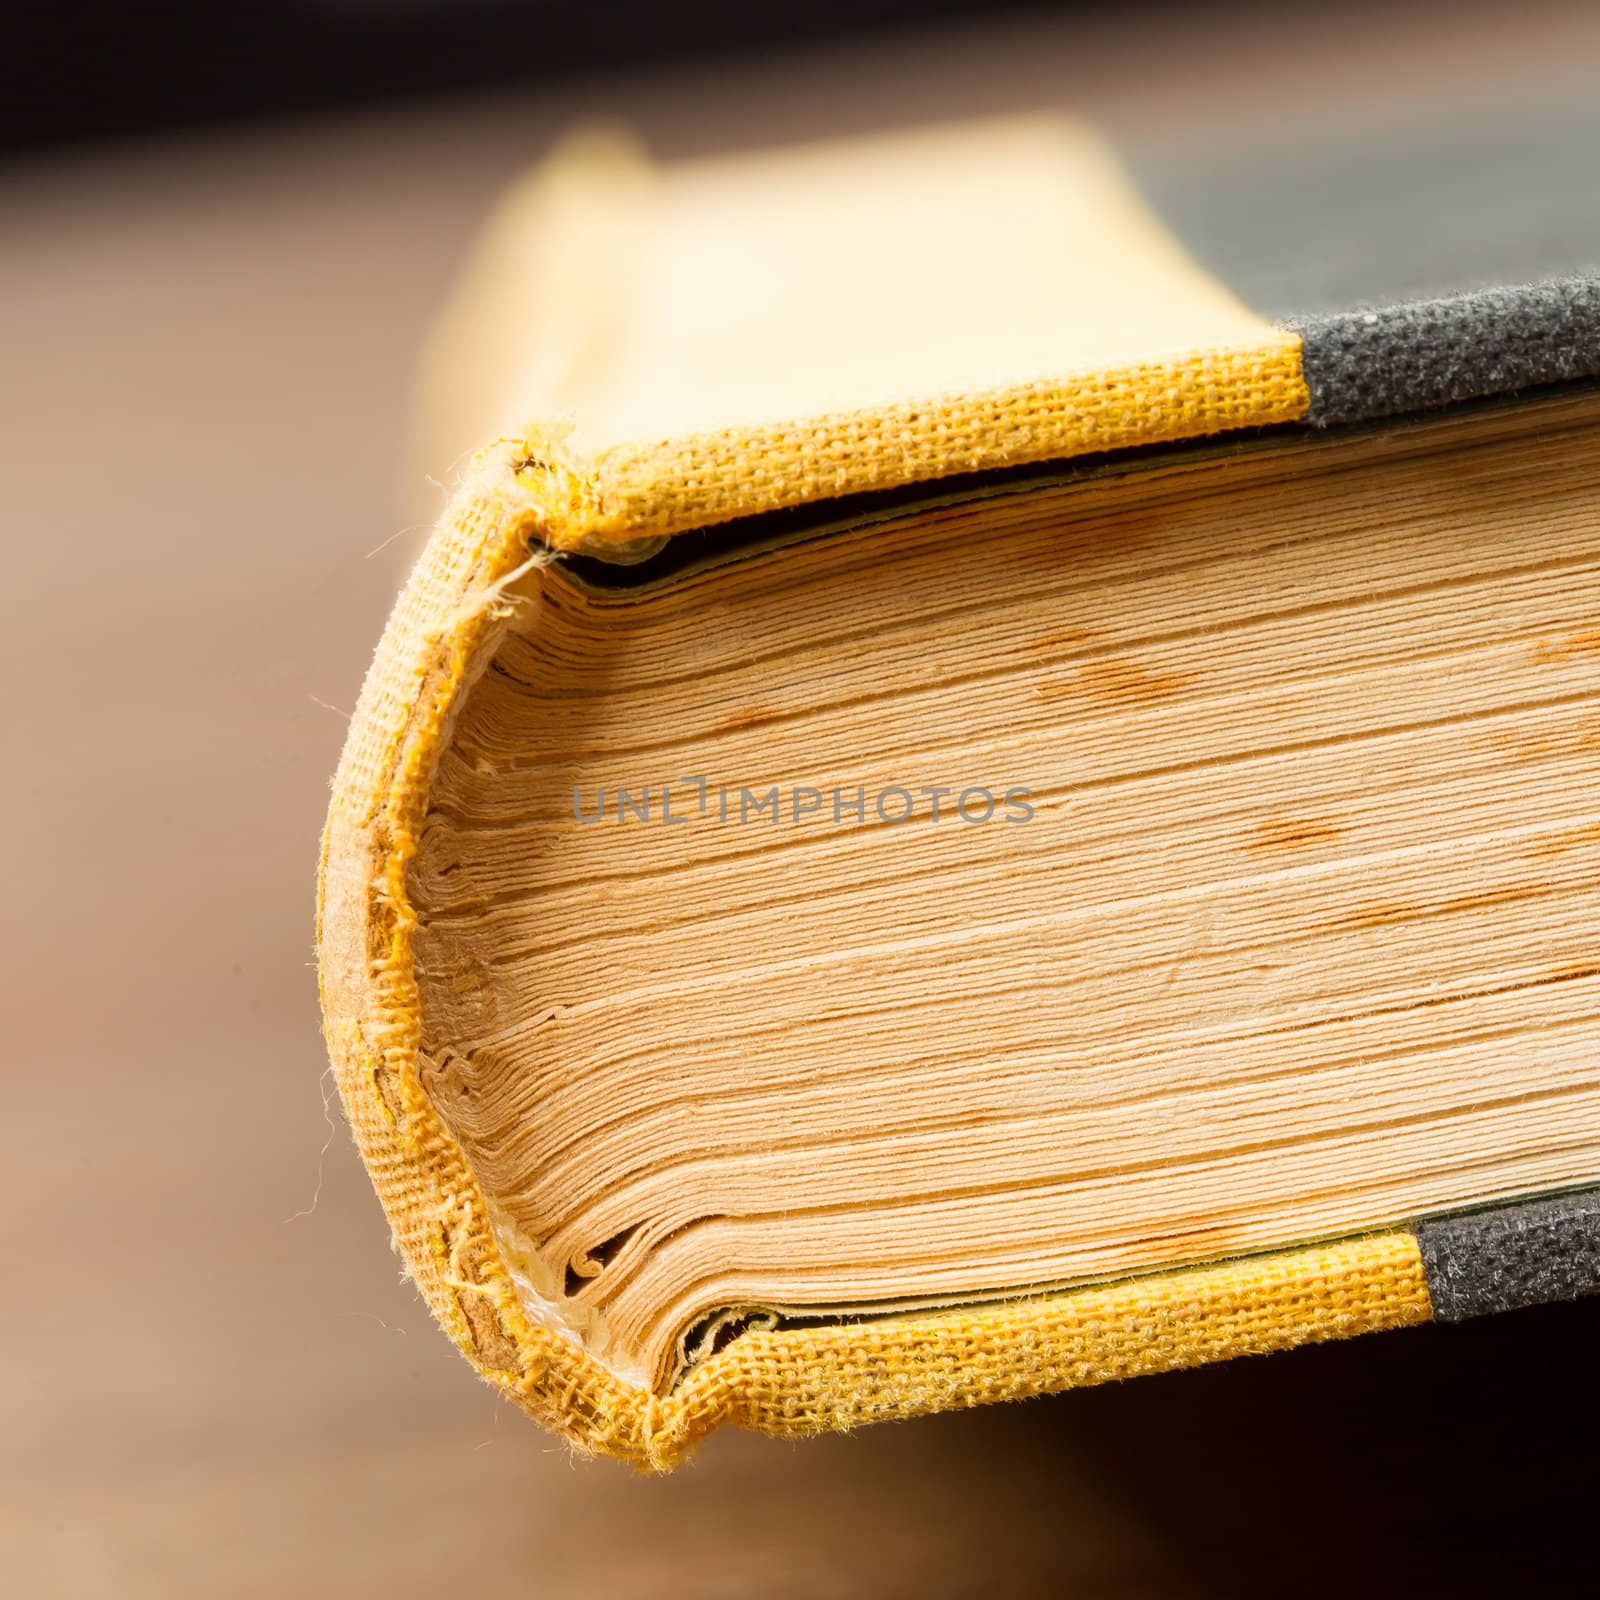 Close-up of an old book on a wooden table